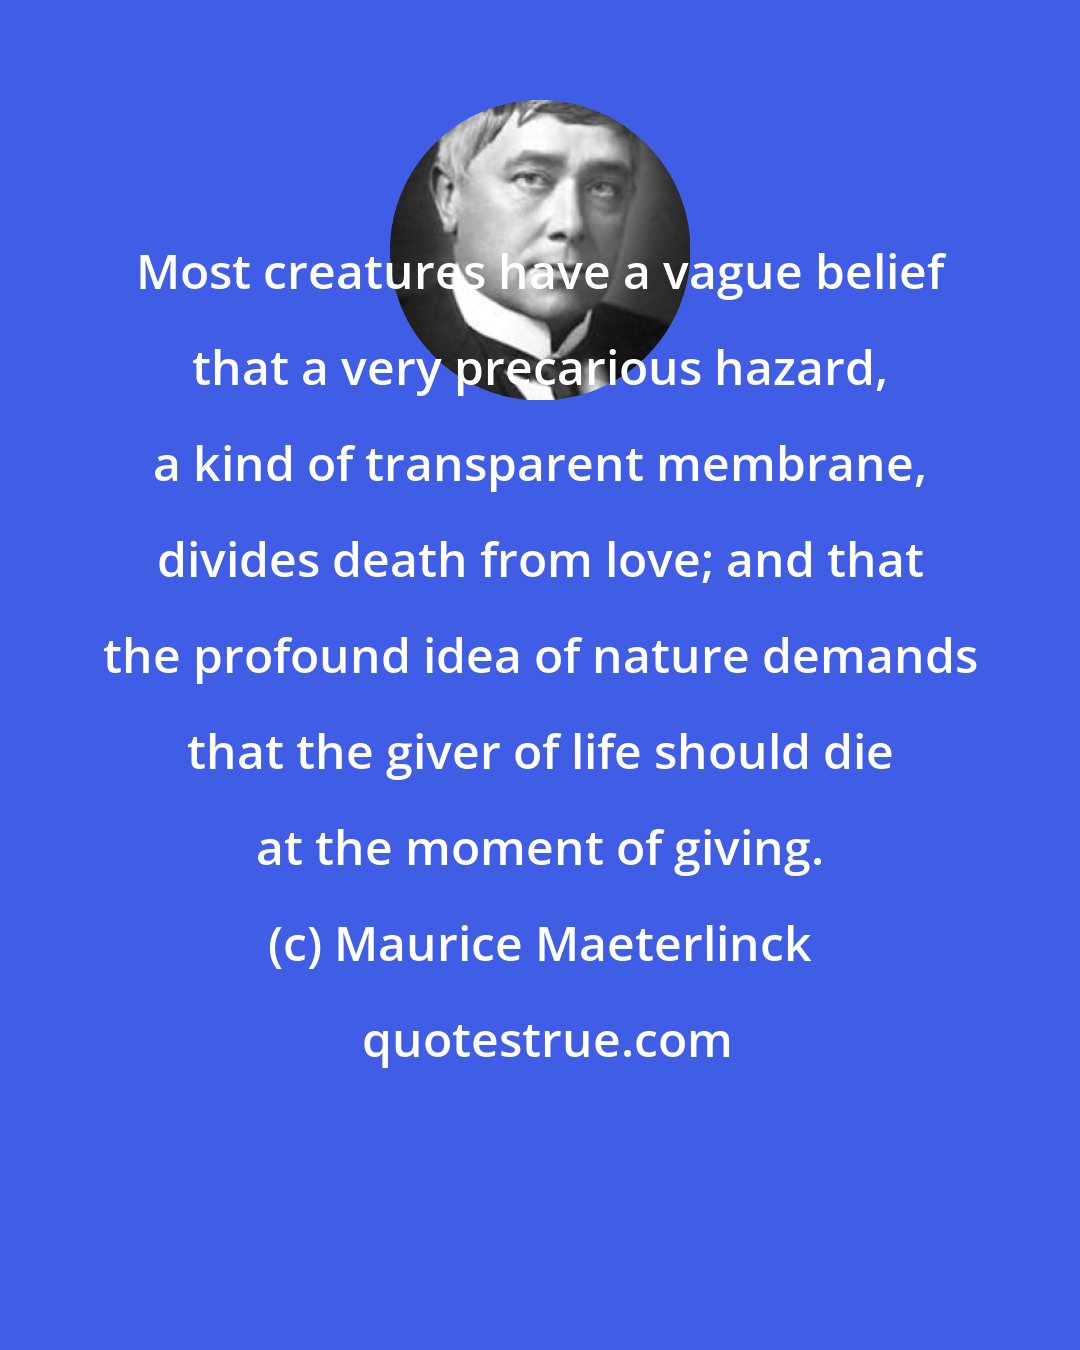 Maurice Maeterlinck: Most creatures have a vague belief that a very precarious hazard, a kind of transparent membrane, divides death from love; and that the profound idea of nature demands that the giver of life should die at the moment of giving.